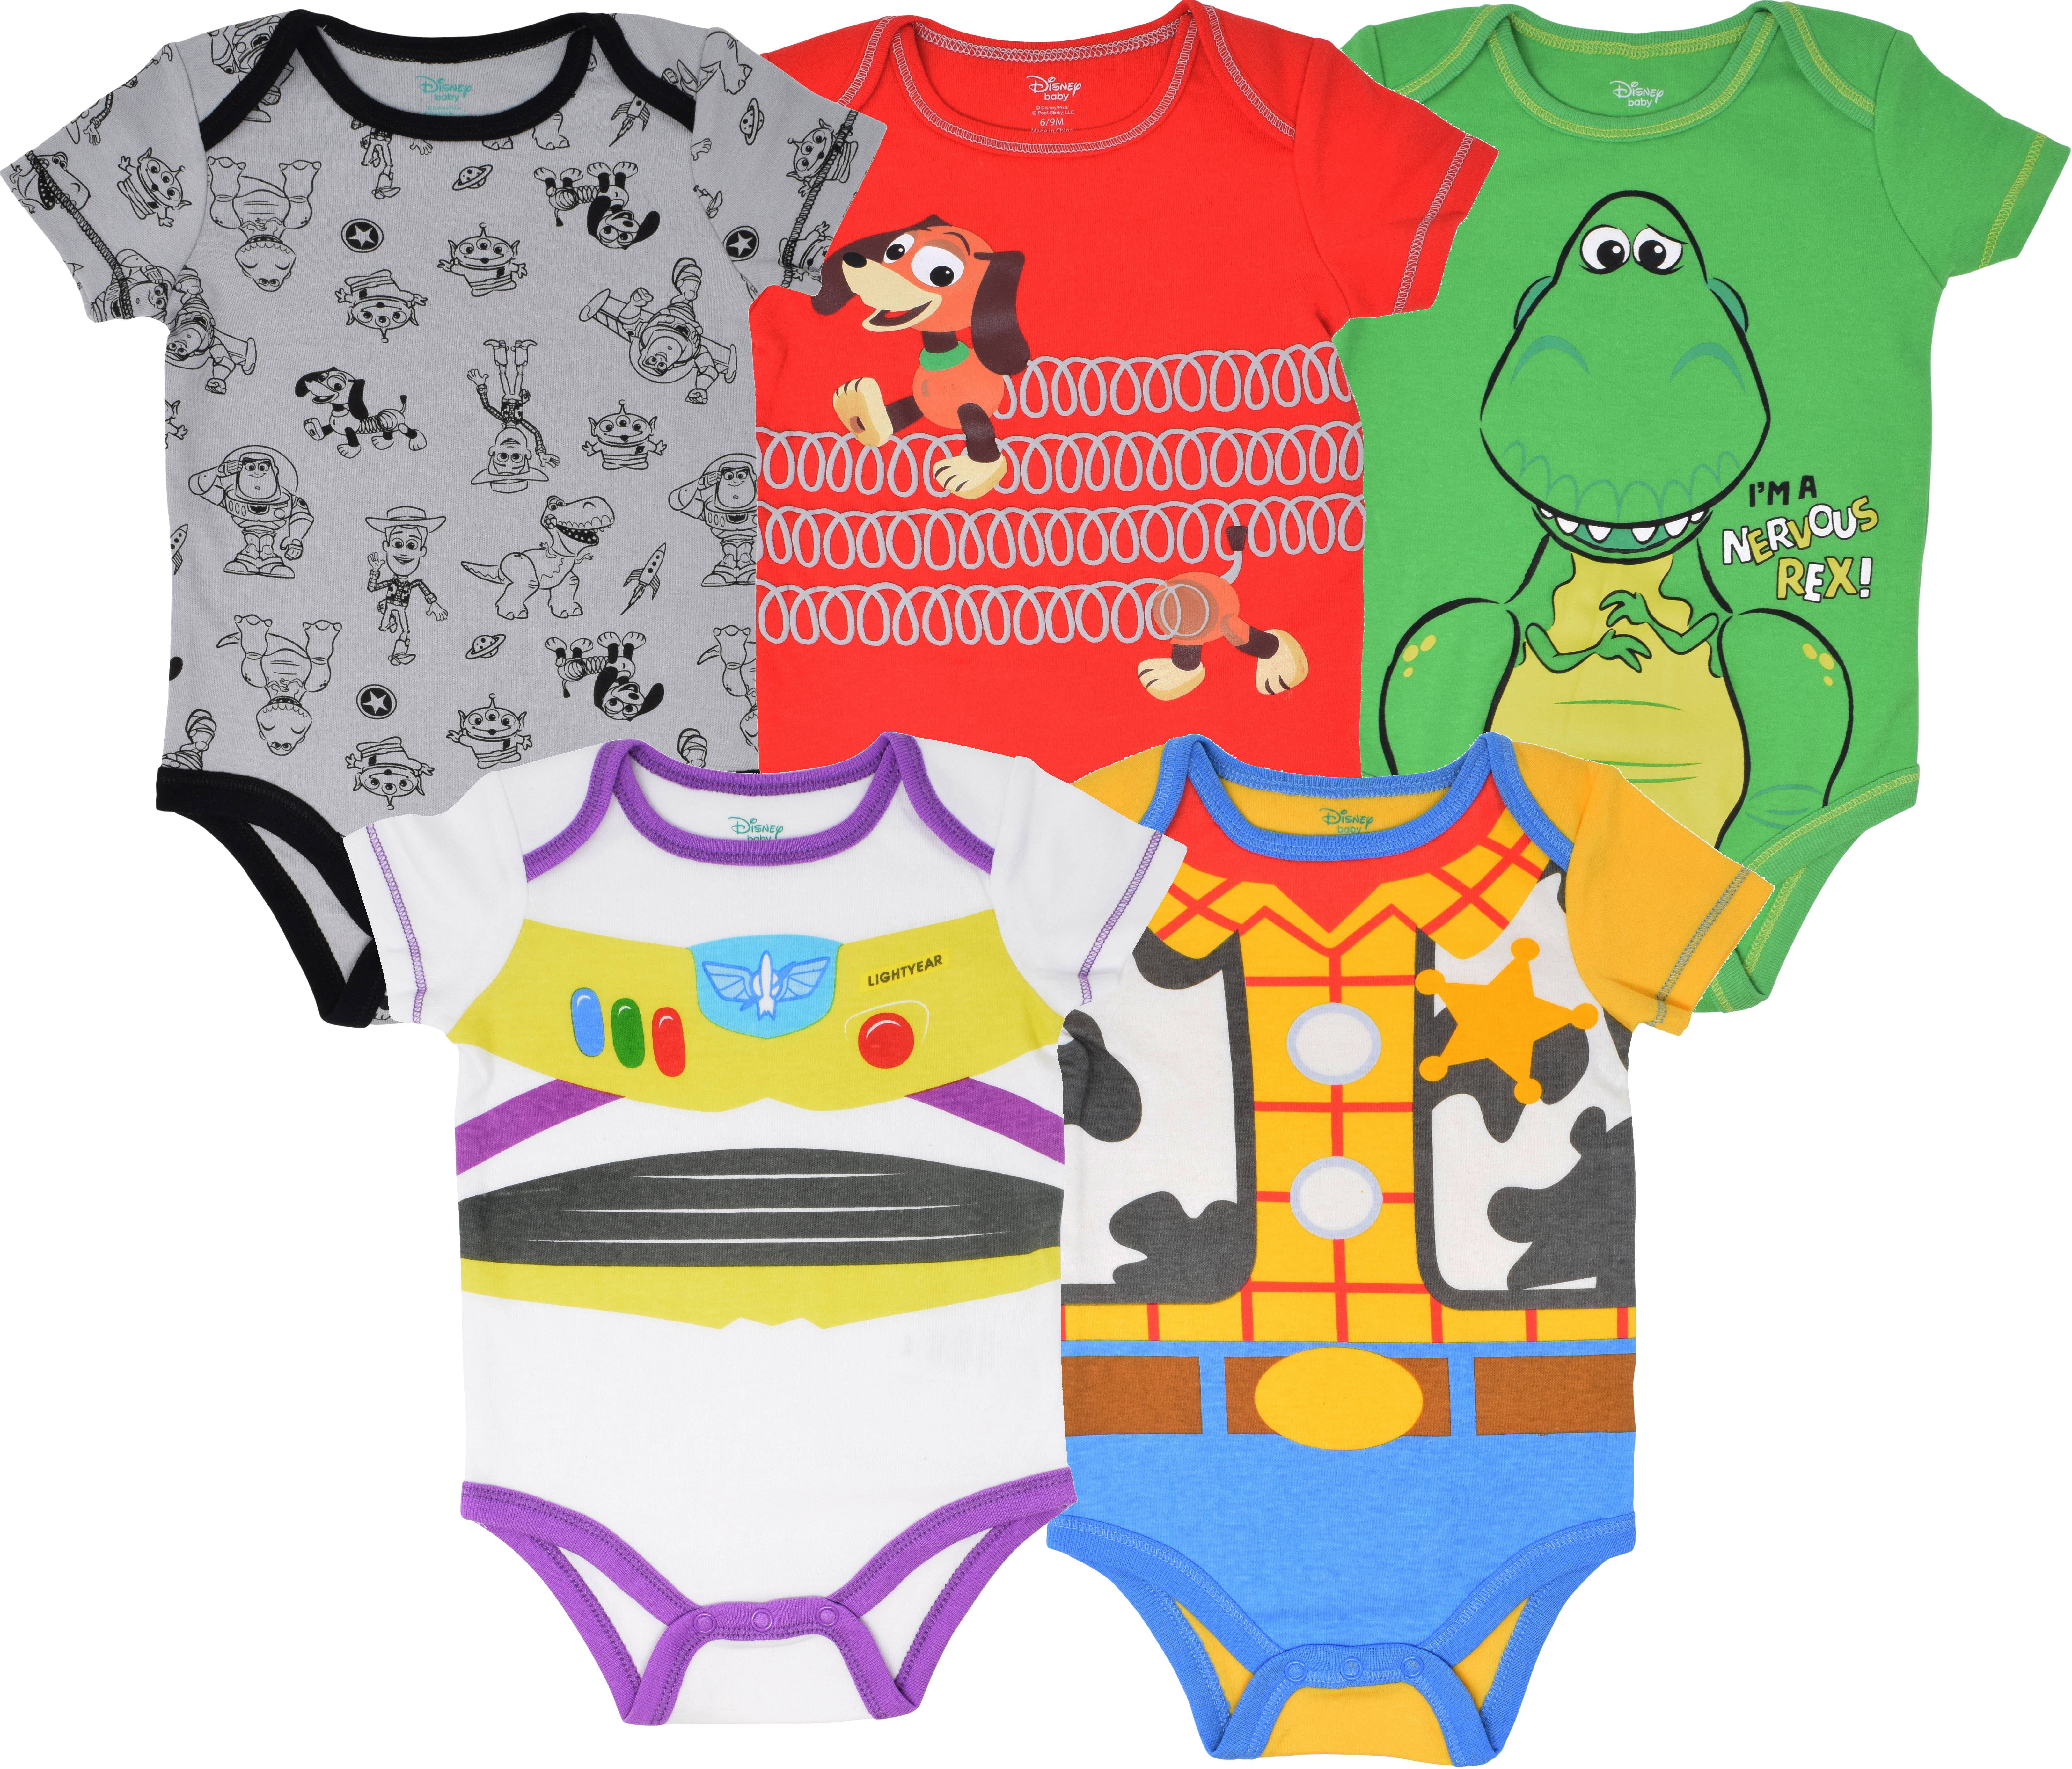 Goofy for Infant and Newborn Donald Disney 5-Pack Baby Boy Onesies with Mickey